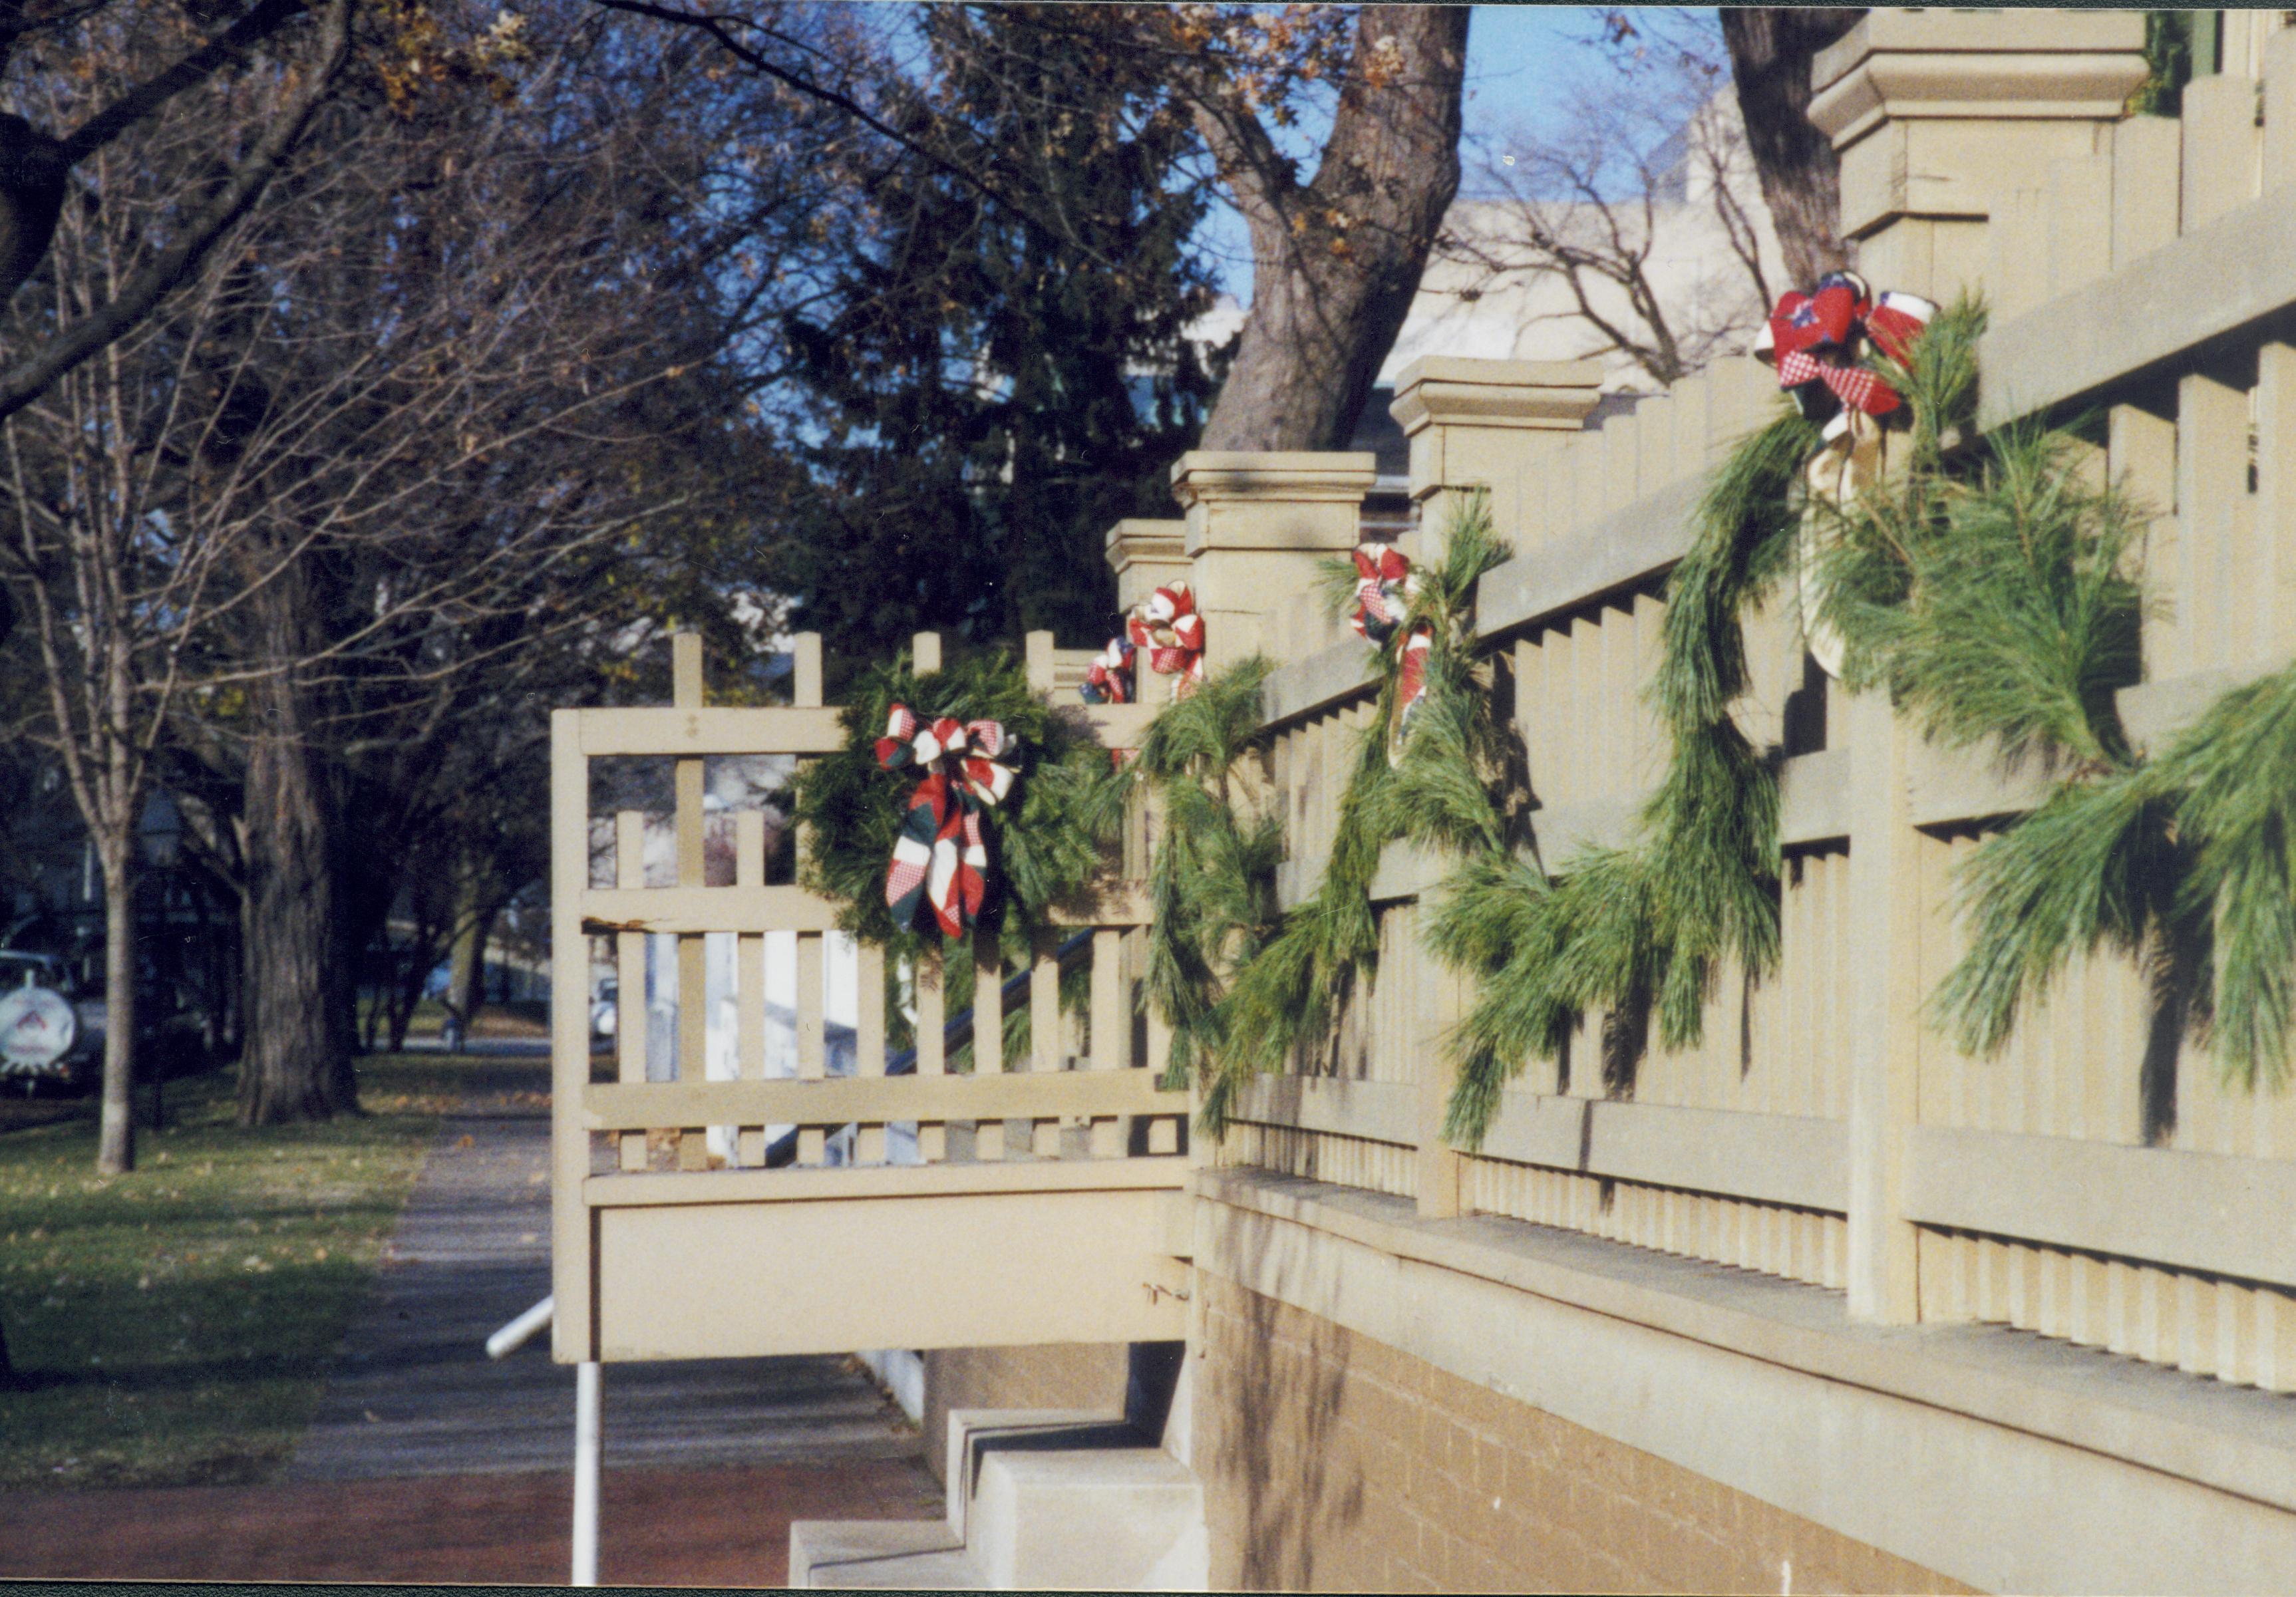 Close-up of Christmas decorations at Lincoln home. Lincoln Home NHS- Christmas in Lincoln Neighborhood 2000, HS-01 2000-10 Christmas, decorations, neighborhood